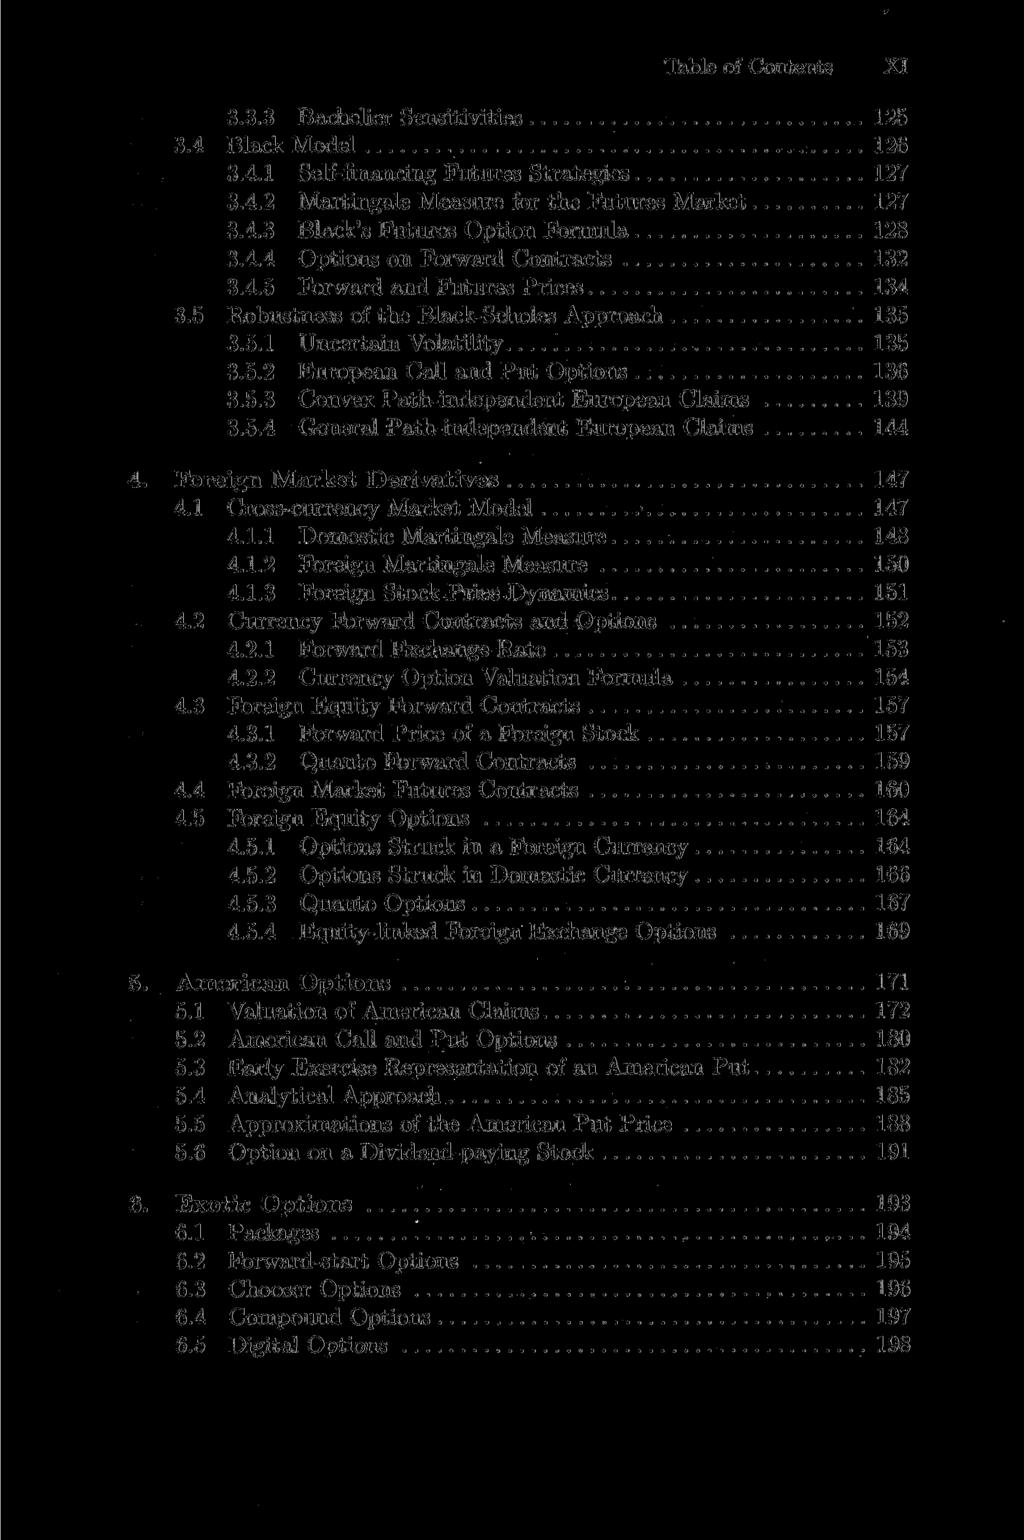 Table of Contents XI 3.3.3 Bachelier Sensitivities 125 3.4 Black Model 126 3.4.1 Self-financing Futures Strategies 127 3.4.2 Martingale Measure for the Futures Market 127 3.4.3 Black's Futures Option Formula 128 3.